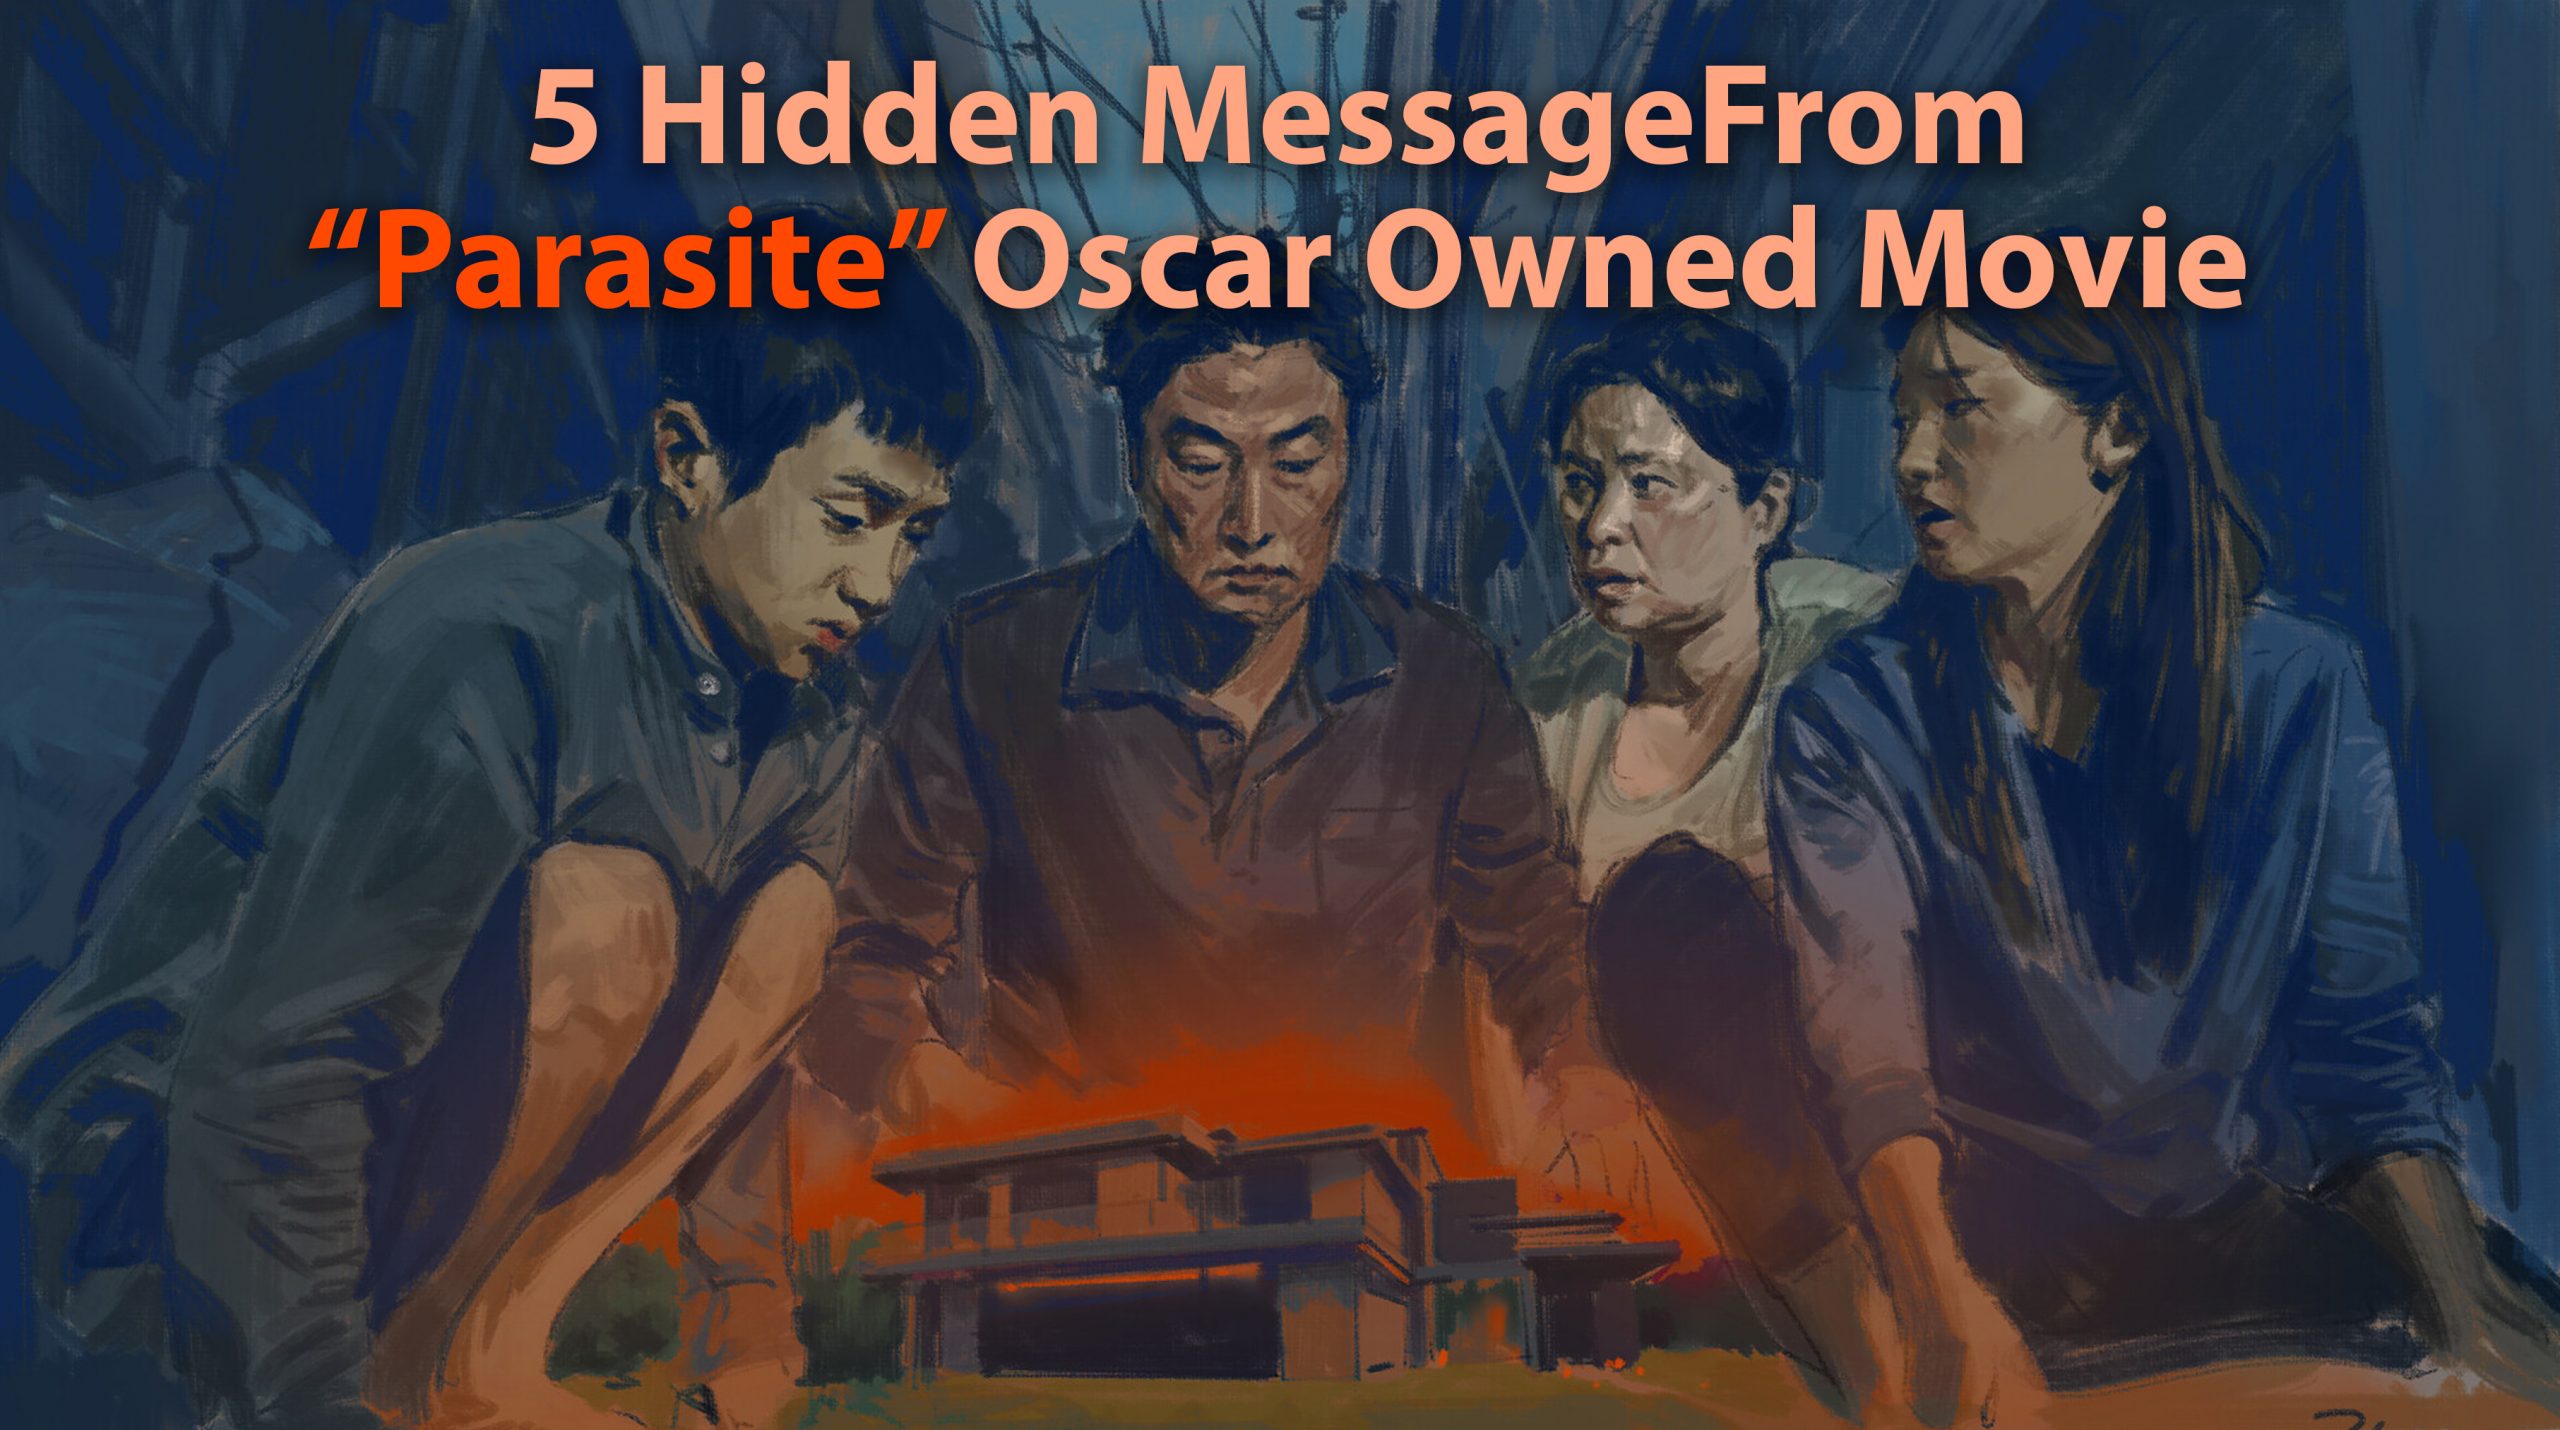 5 Hidden Message From “Parasite” Oscar Owned Movie